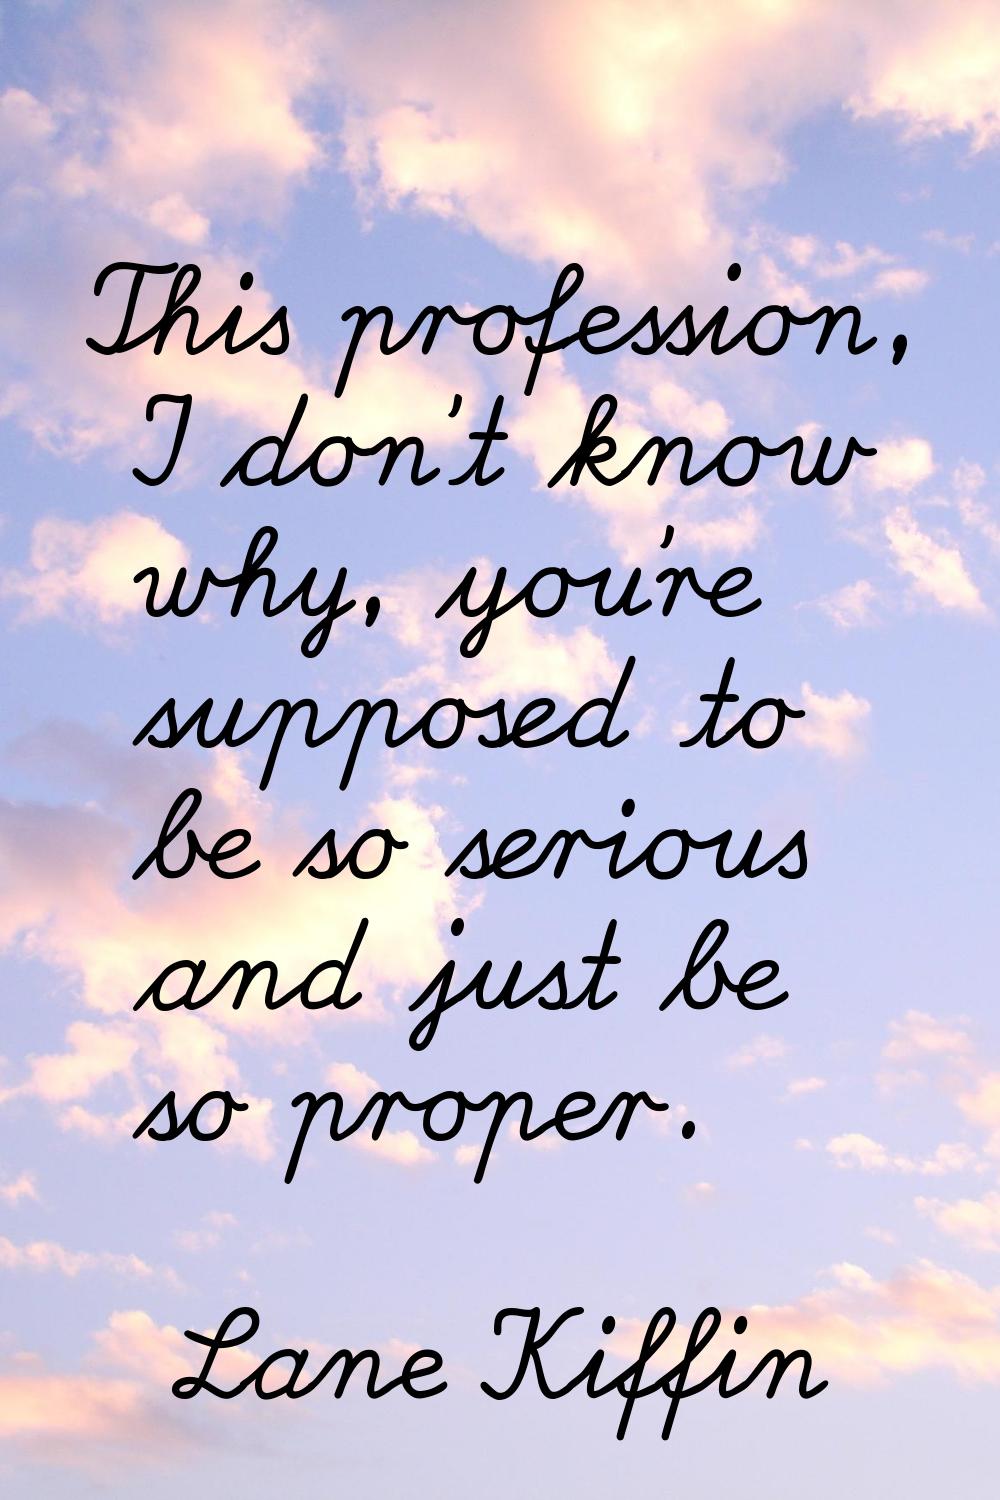 This profession, I don't know why, you're supposed to be so serious and just be so proper.